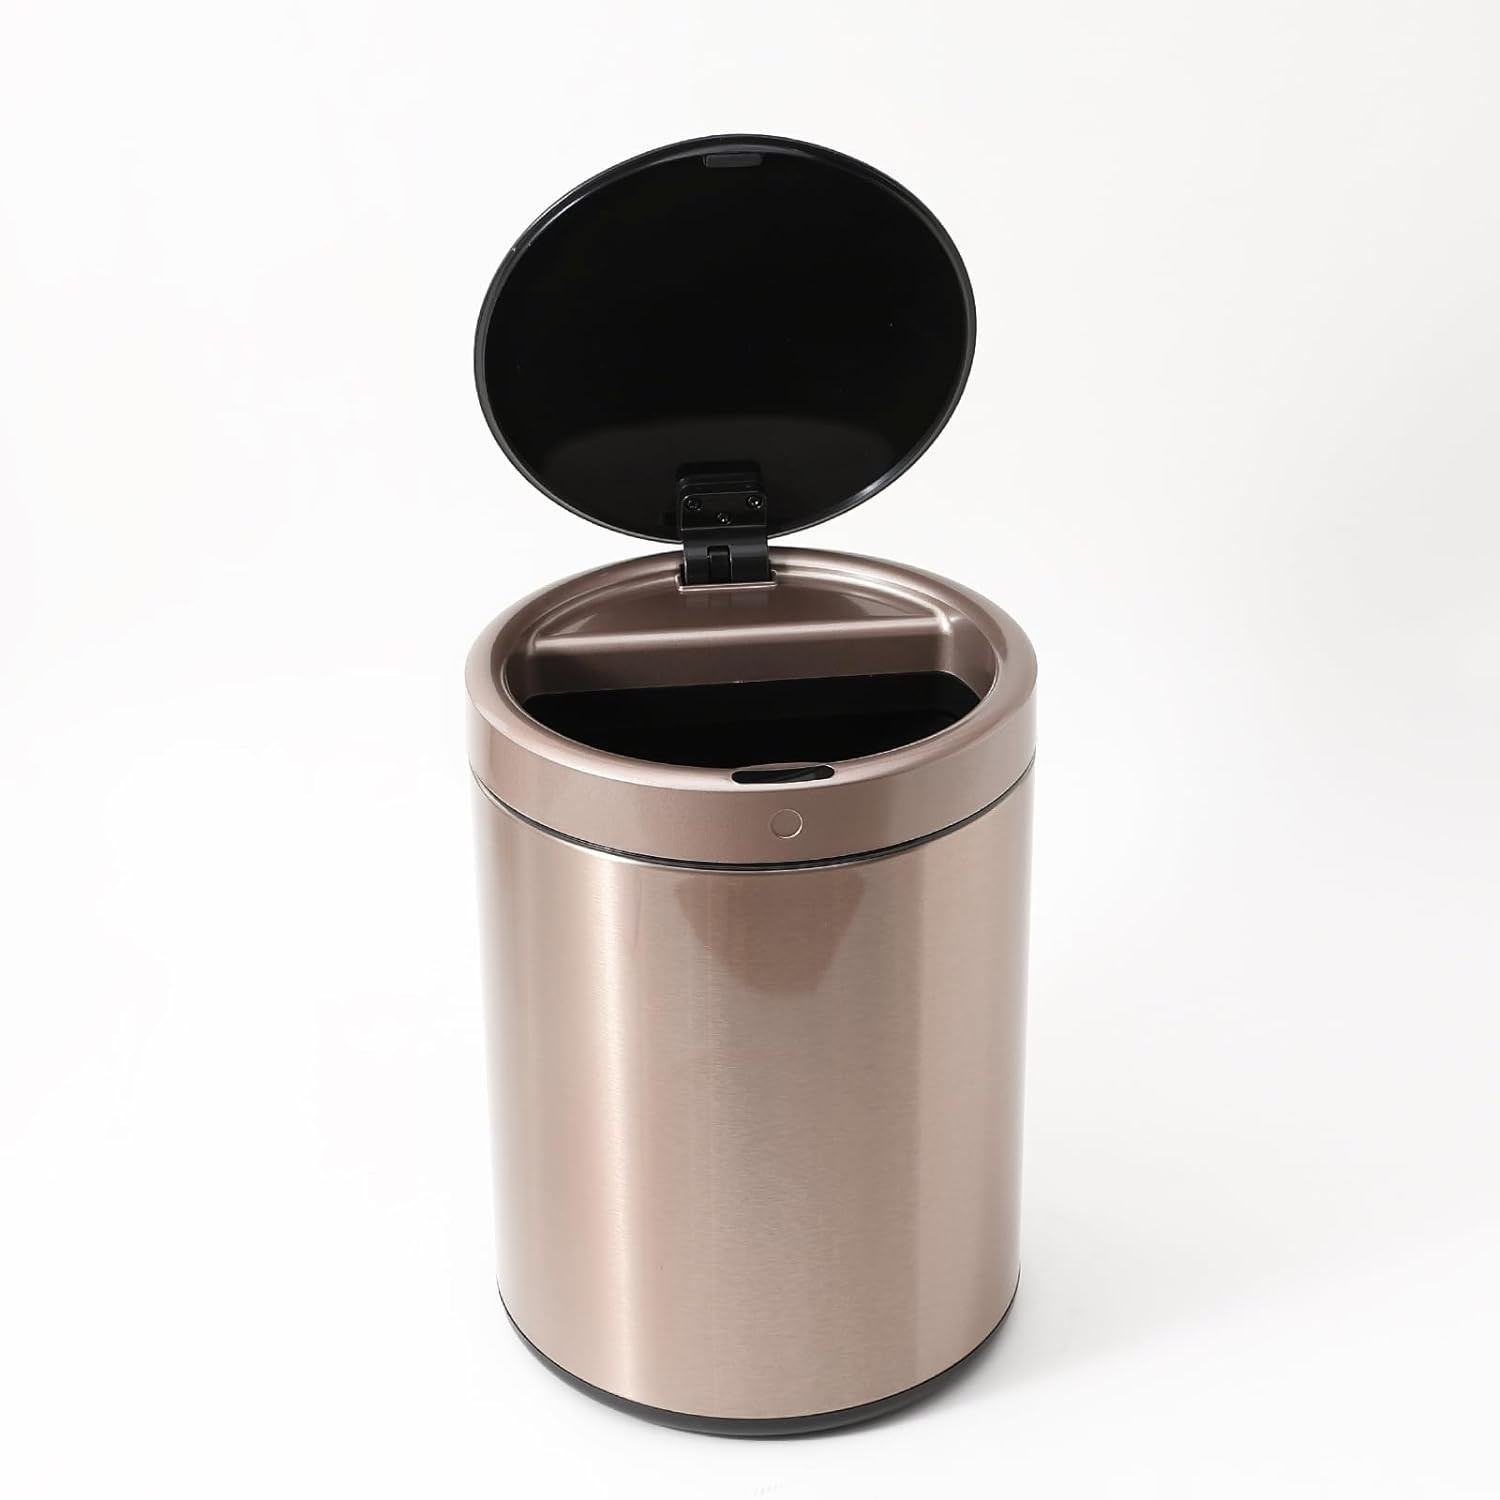 Kuber Industries Sensor Dustbin | Round Sensor Dustbin | Touchless Trash Can | Smart Dustbin for Bedroom-Office-Living Room | Automatic Garbage Can | HN-ZY-RG-9L | Rose Gold